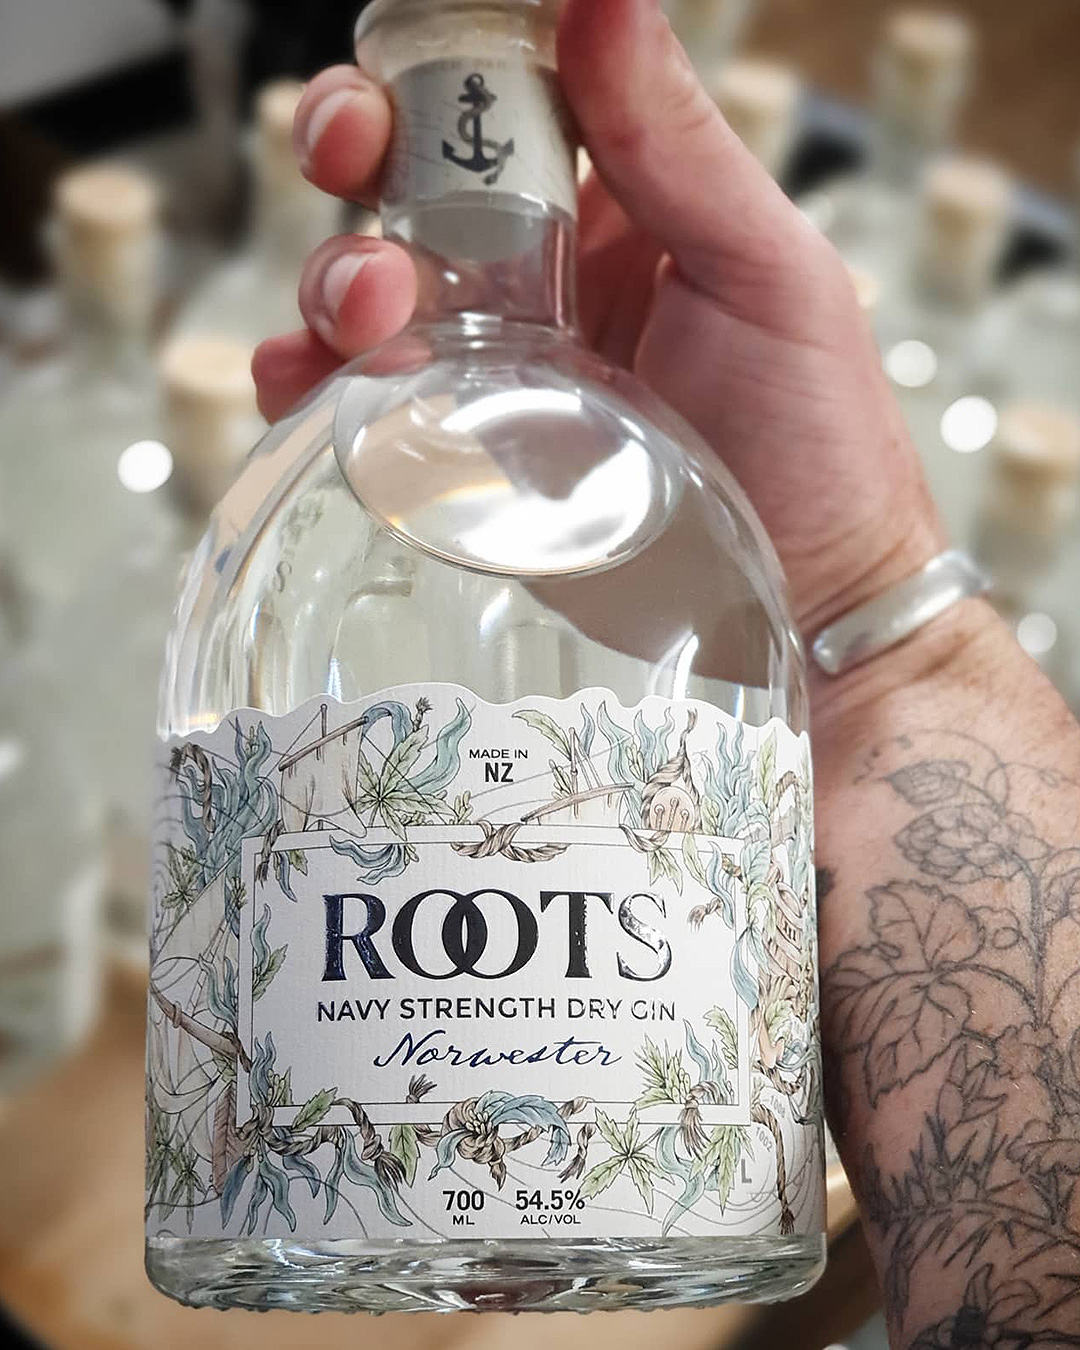 Someone holds a bottle of Elemental Distillers' Roots gin, one of the best gins in NZ.